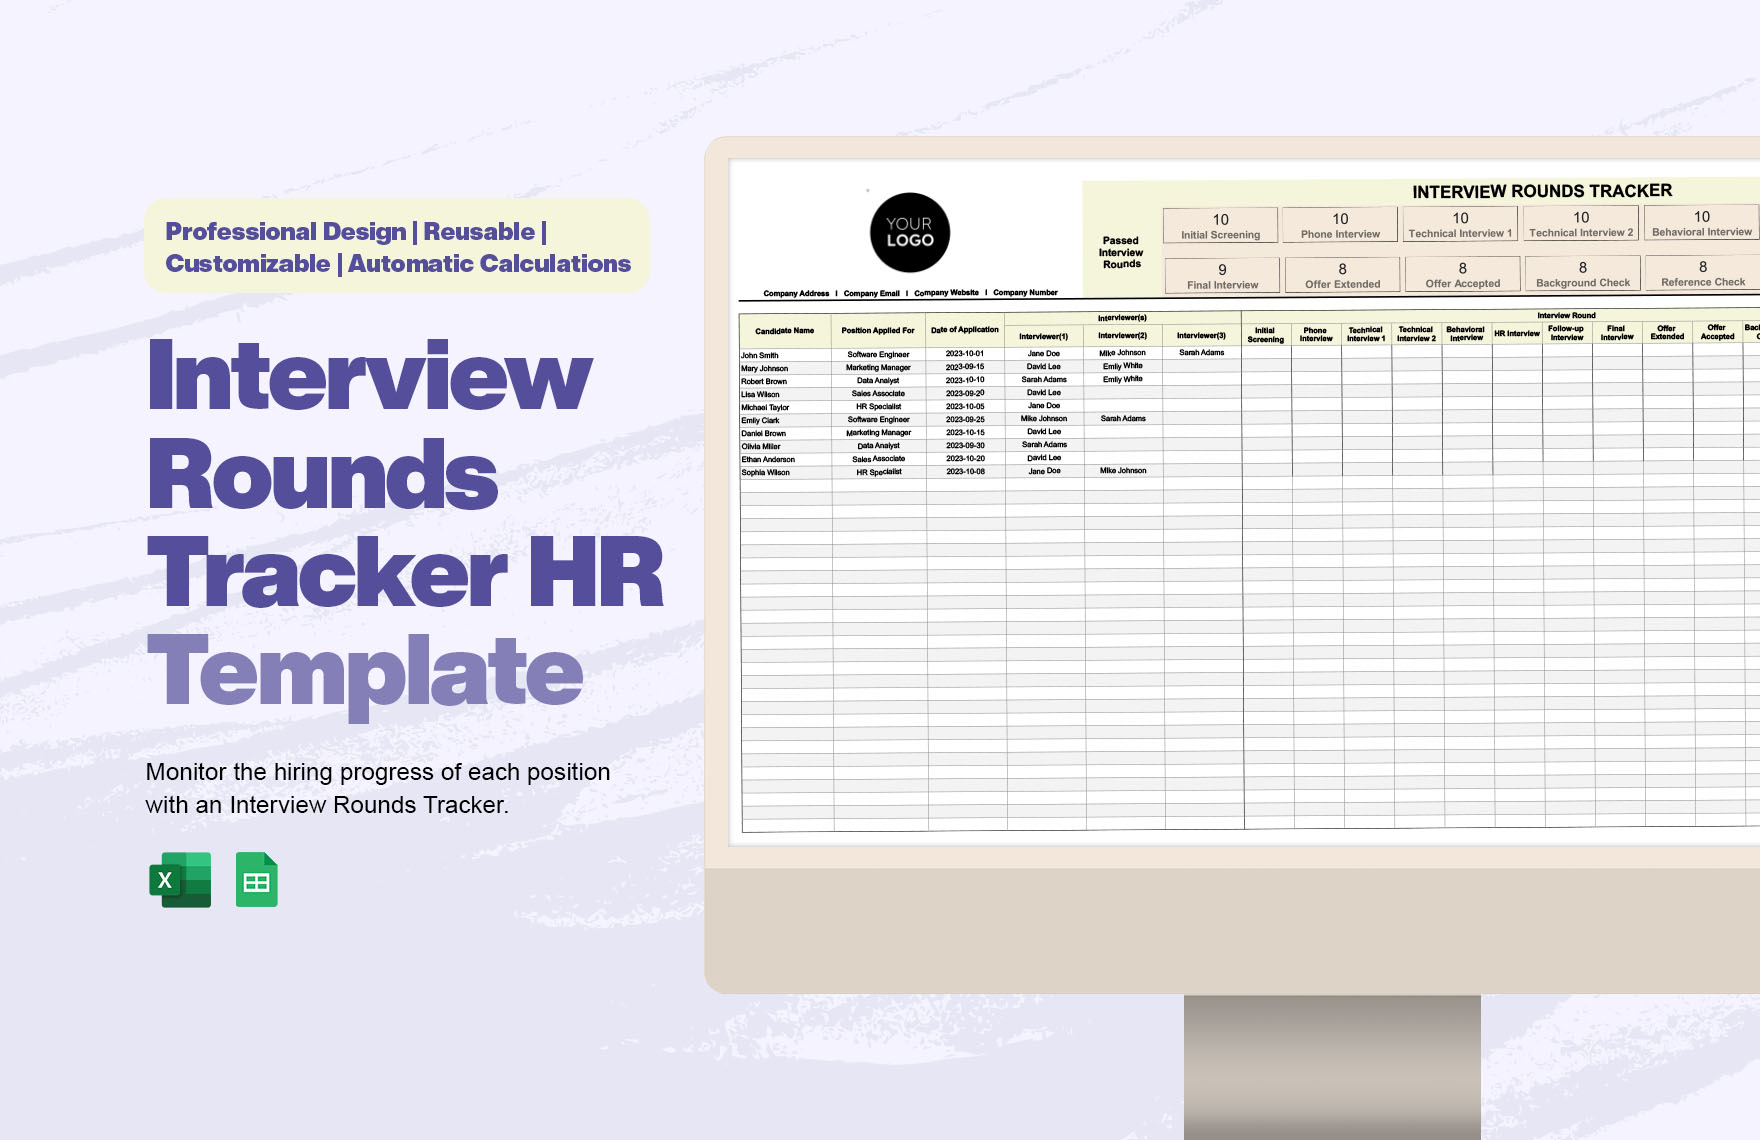 Interview Rounds Tracker HR Template